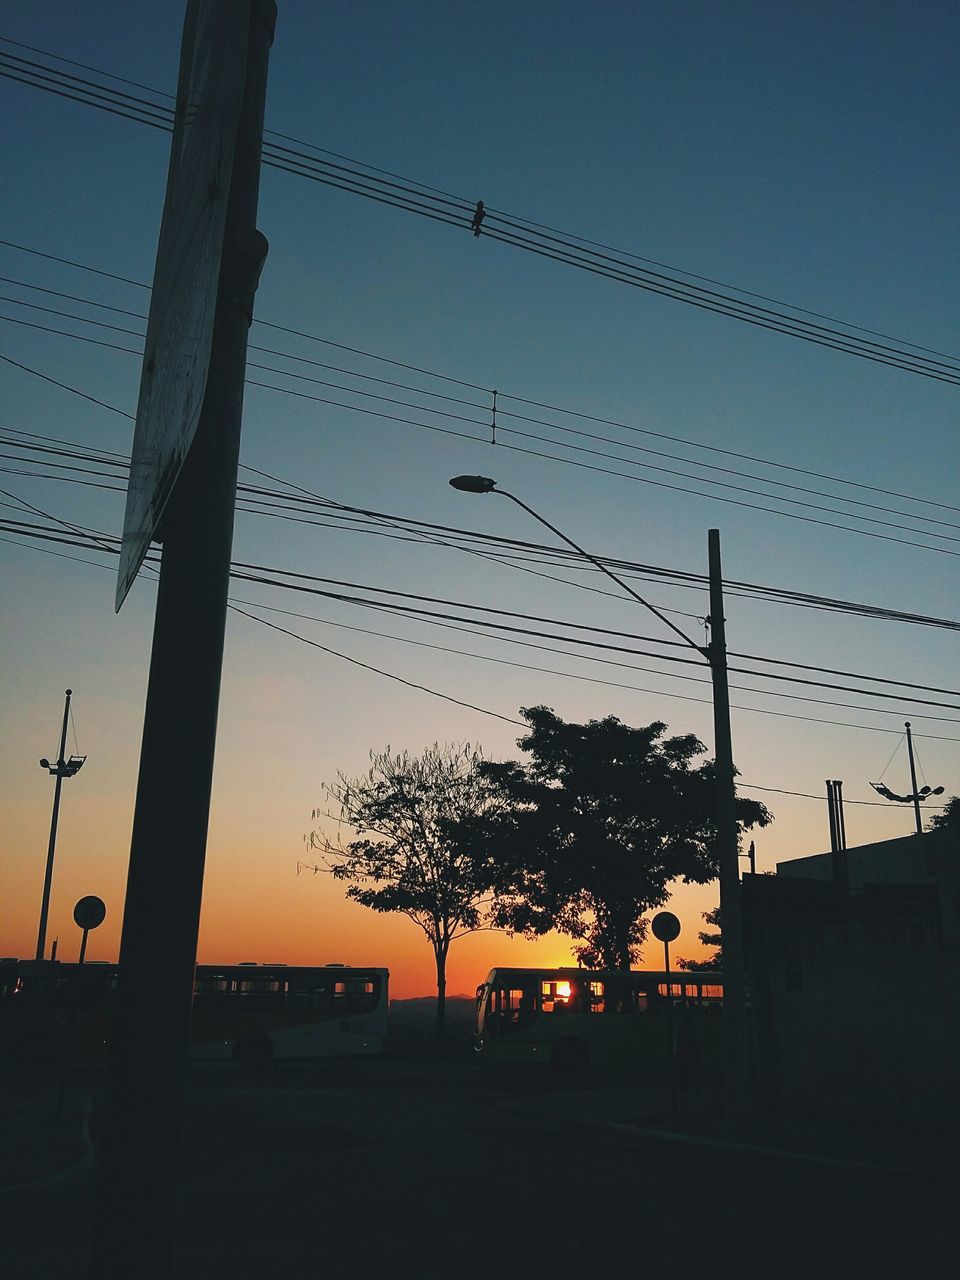 silhouette, power line, sunset, electricity pylon, cable, electricity, connection, power supply, sky, low angle view, fuel and power generation, built structure, clear sky, building exterior, architecture, dusk, technology, power cable, tree, street light